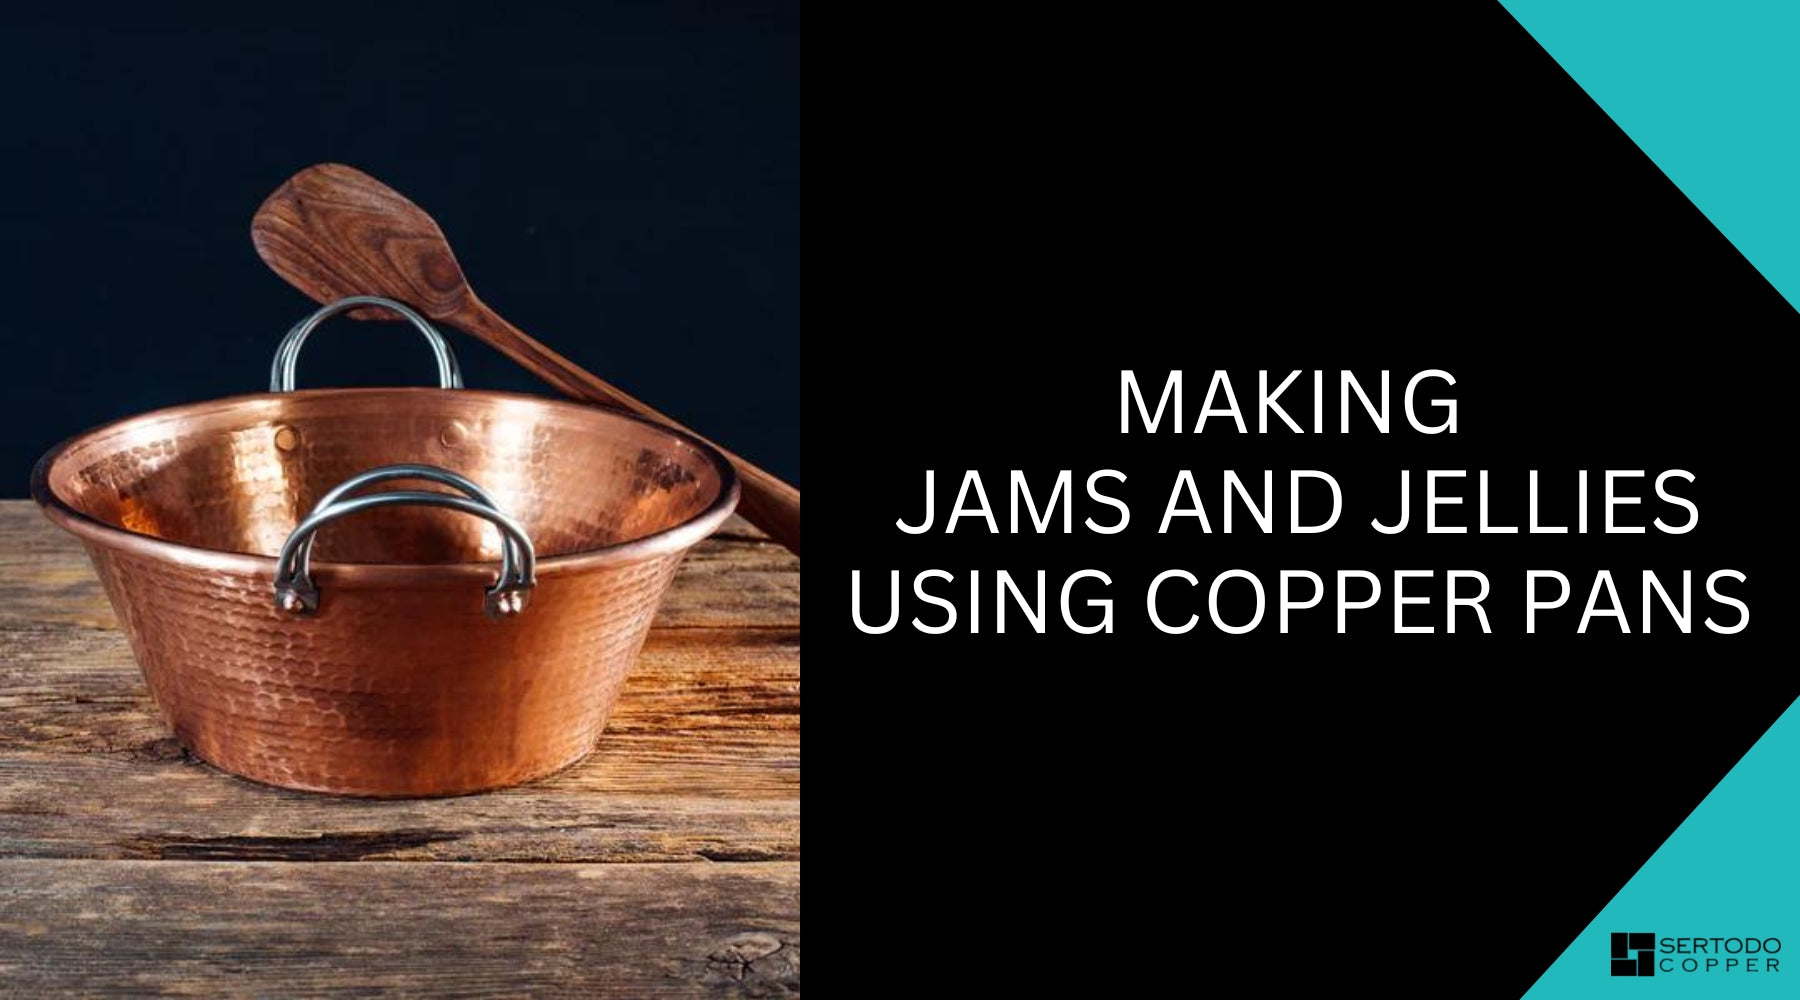 Making Jams and Jellies Using Copper Pans